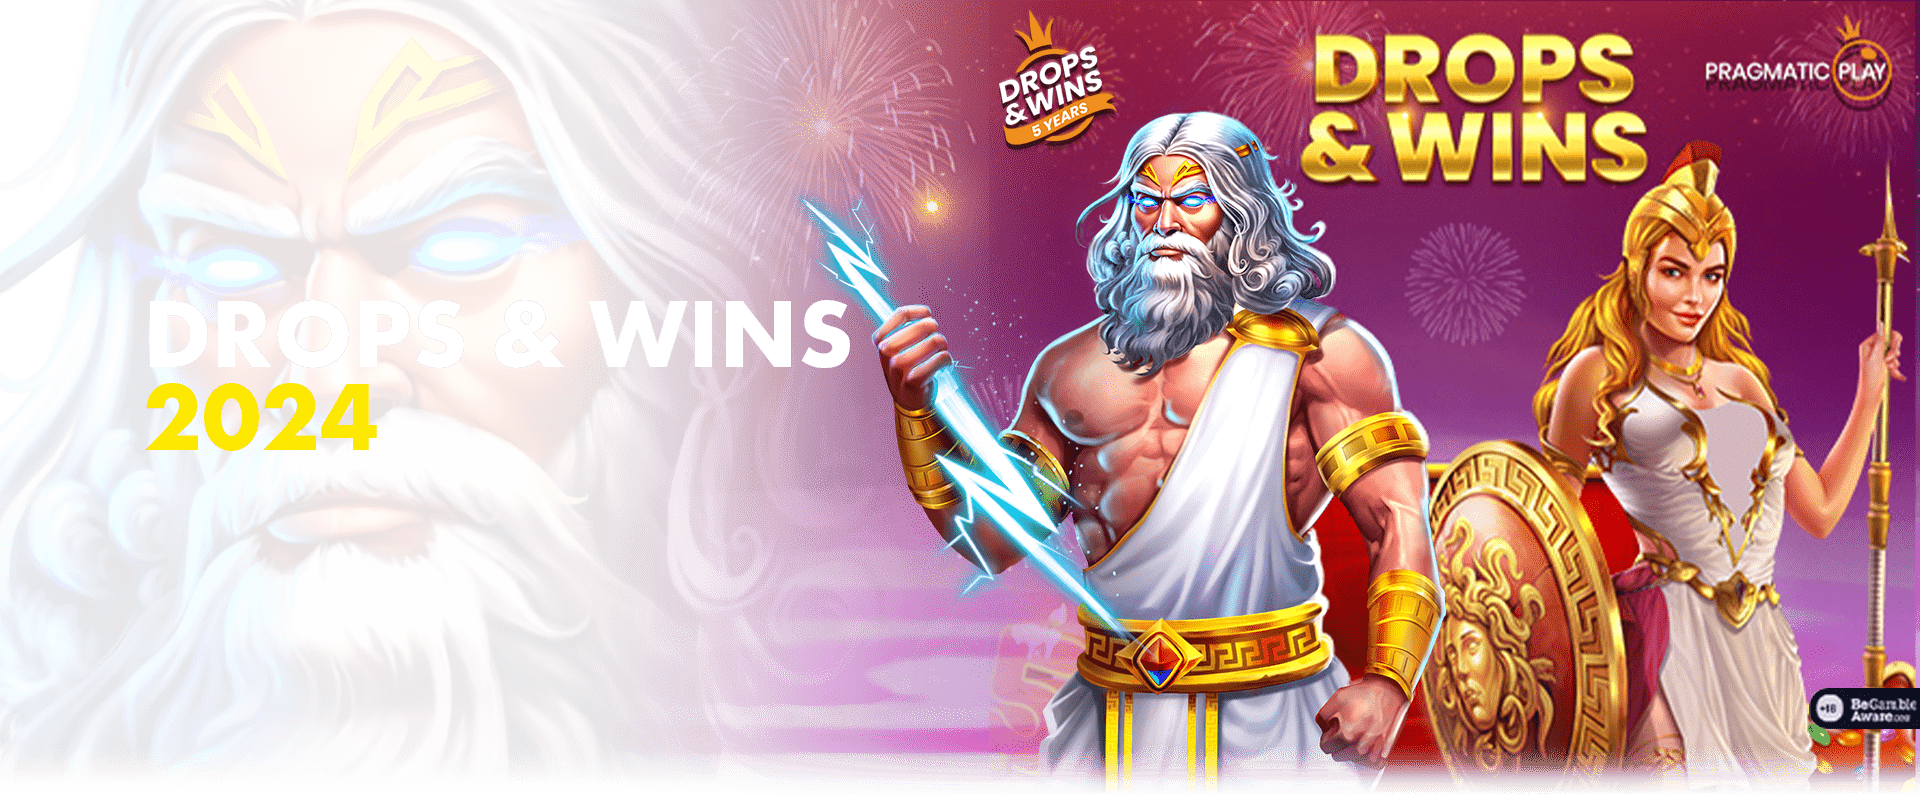 drops and win pragmatic play promotion